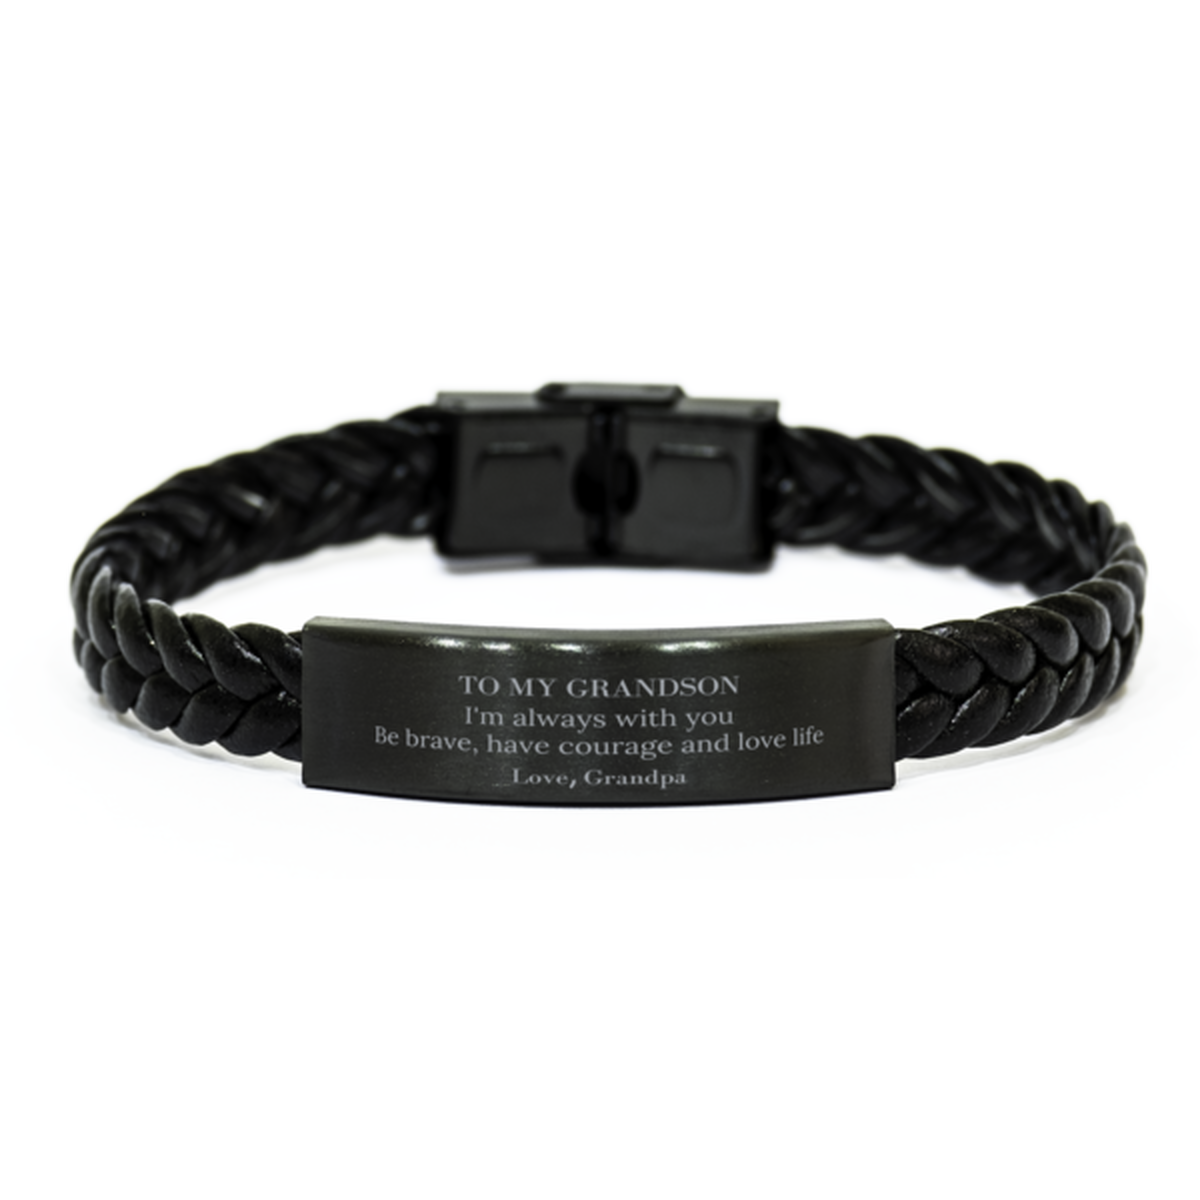 To My Grandson Gifts from Grandpa, Unique Braided Leather Bracelet Inspirational Christmas Birthday Graduation Gifts for Grandson I'm always with you. Be brave, have courage and love life. Love, Grandpa